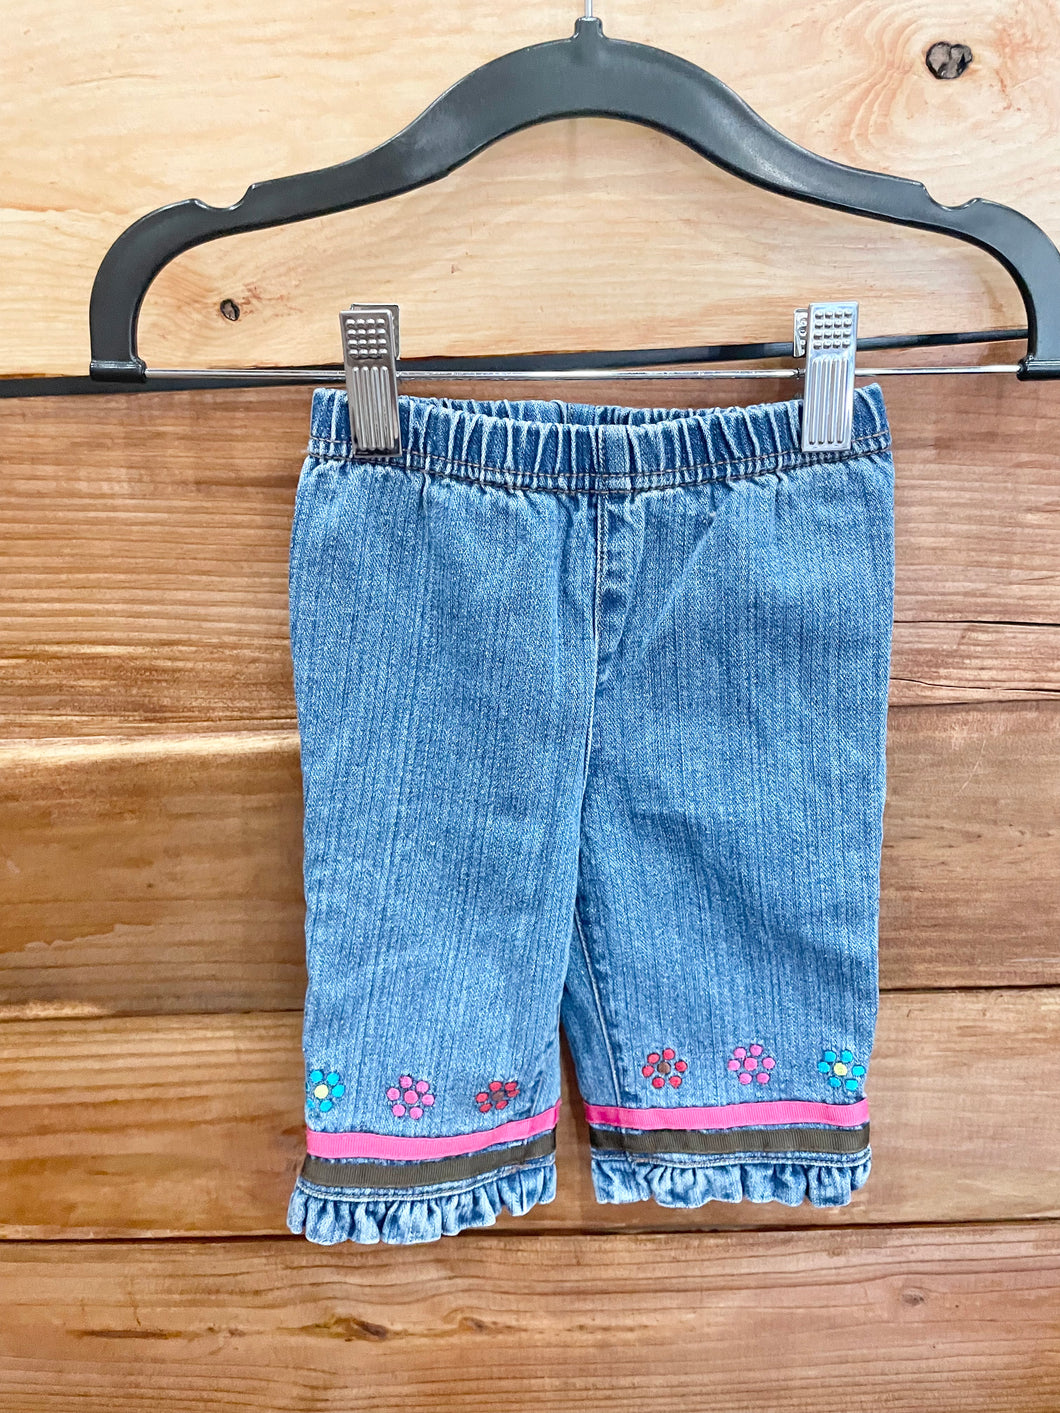 Hanna Andersson Blue Jeans Size 6-12m